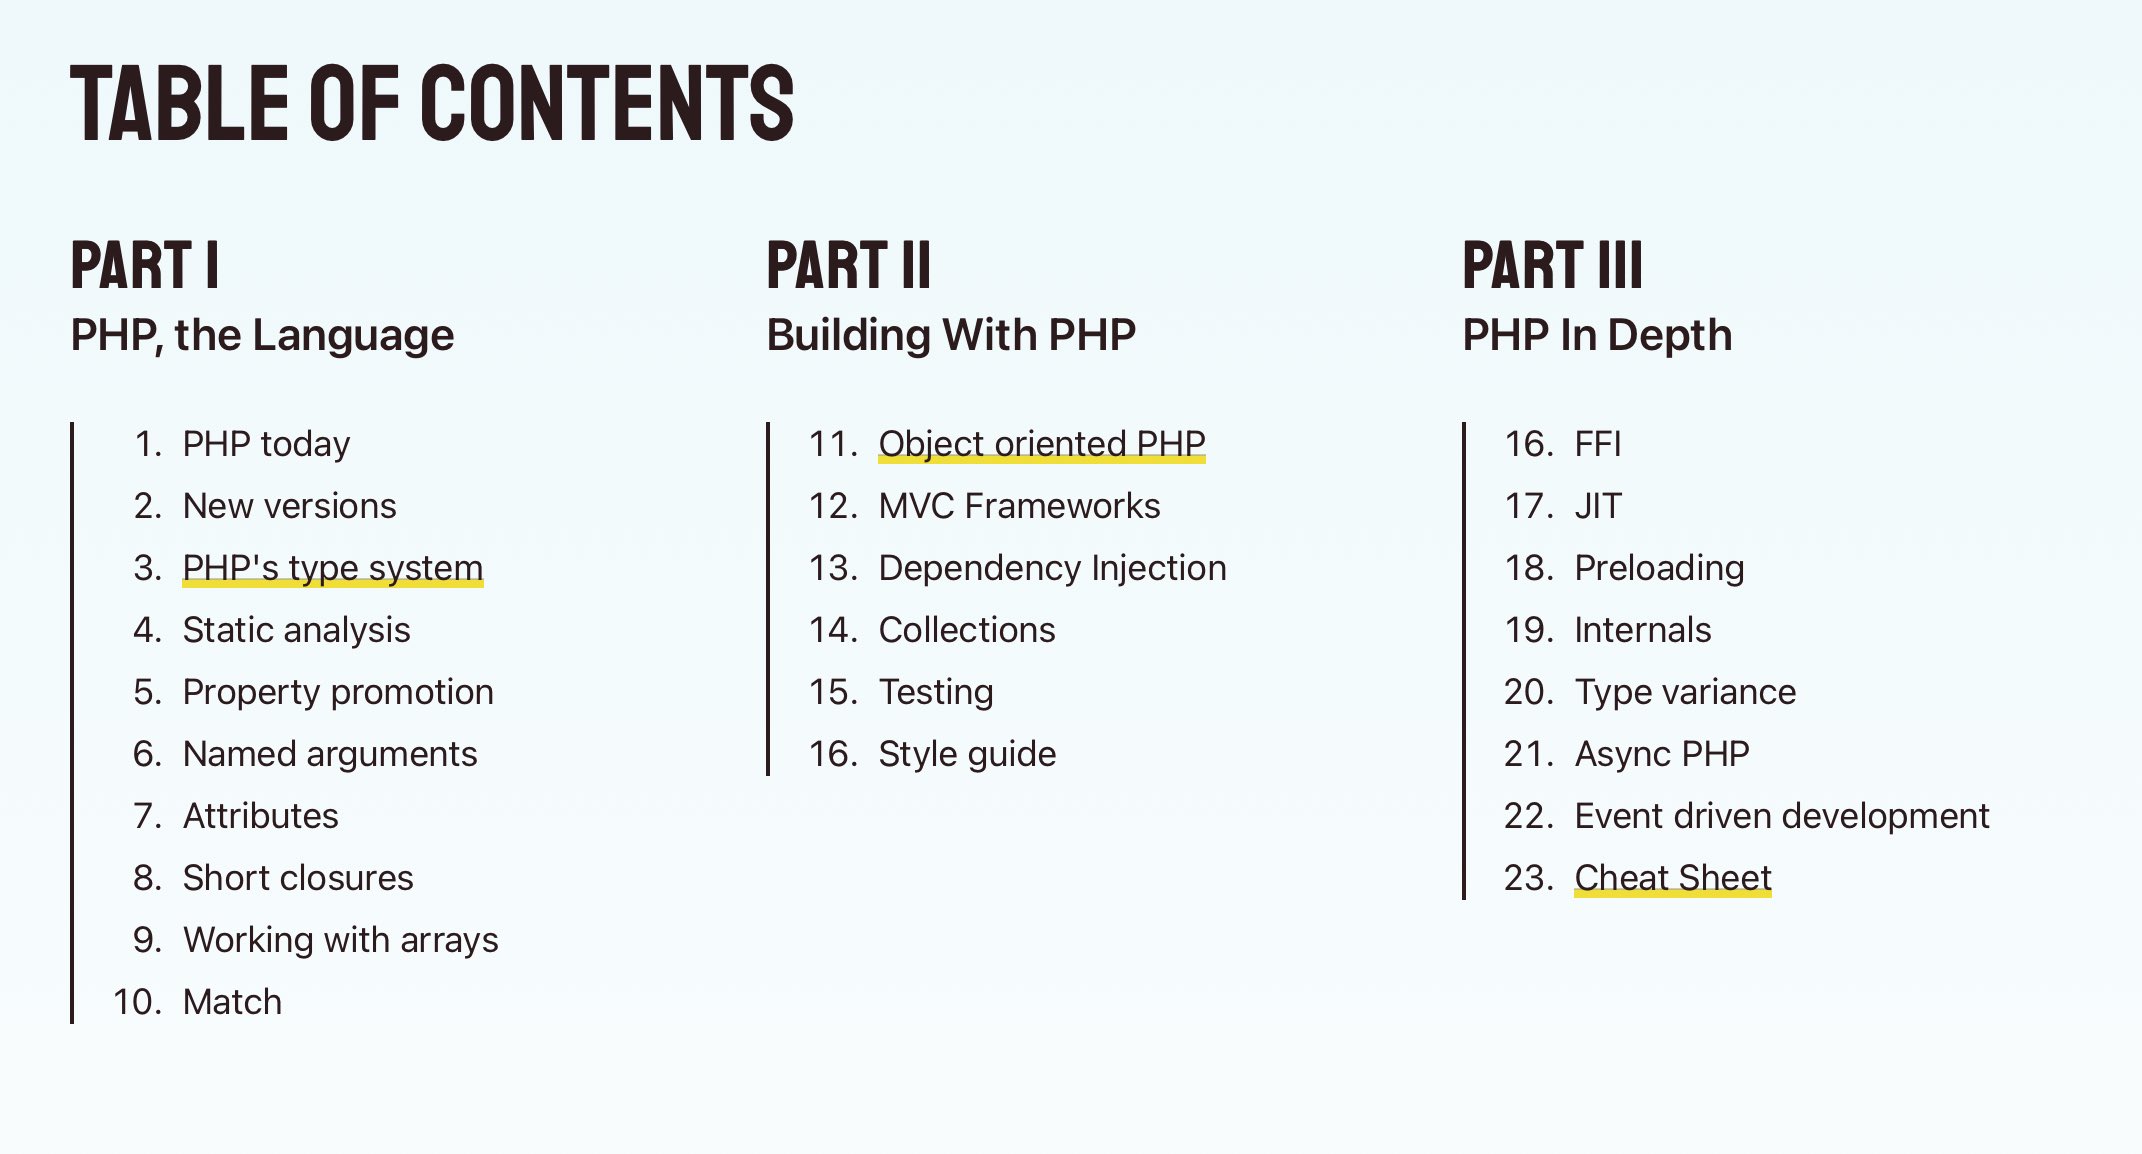 Object Oriented PHP - PART-2